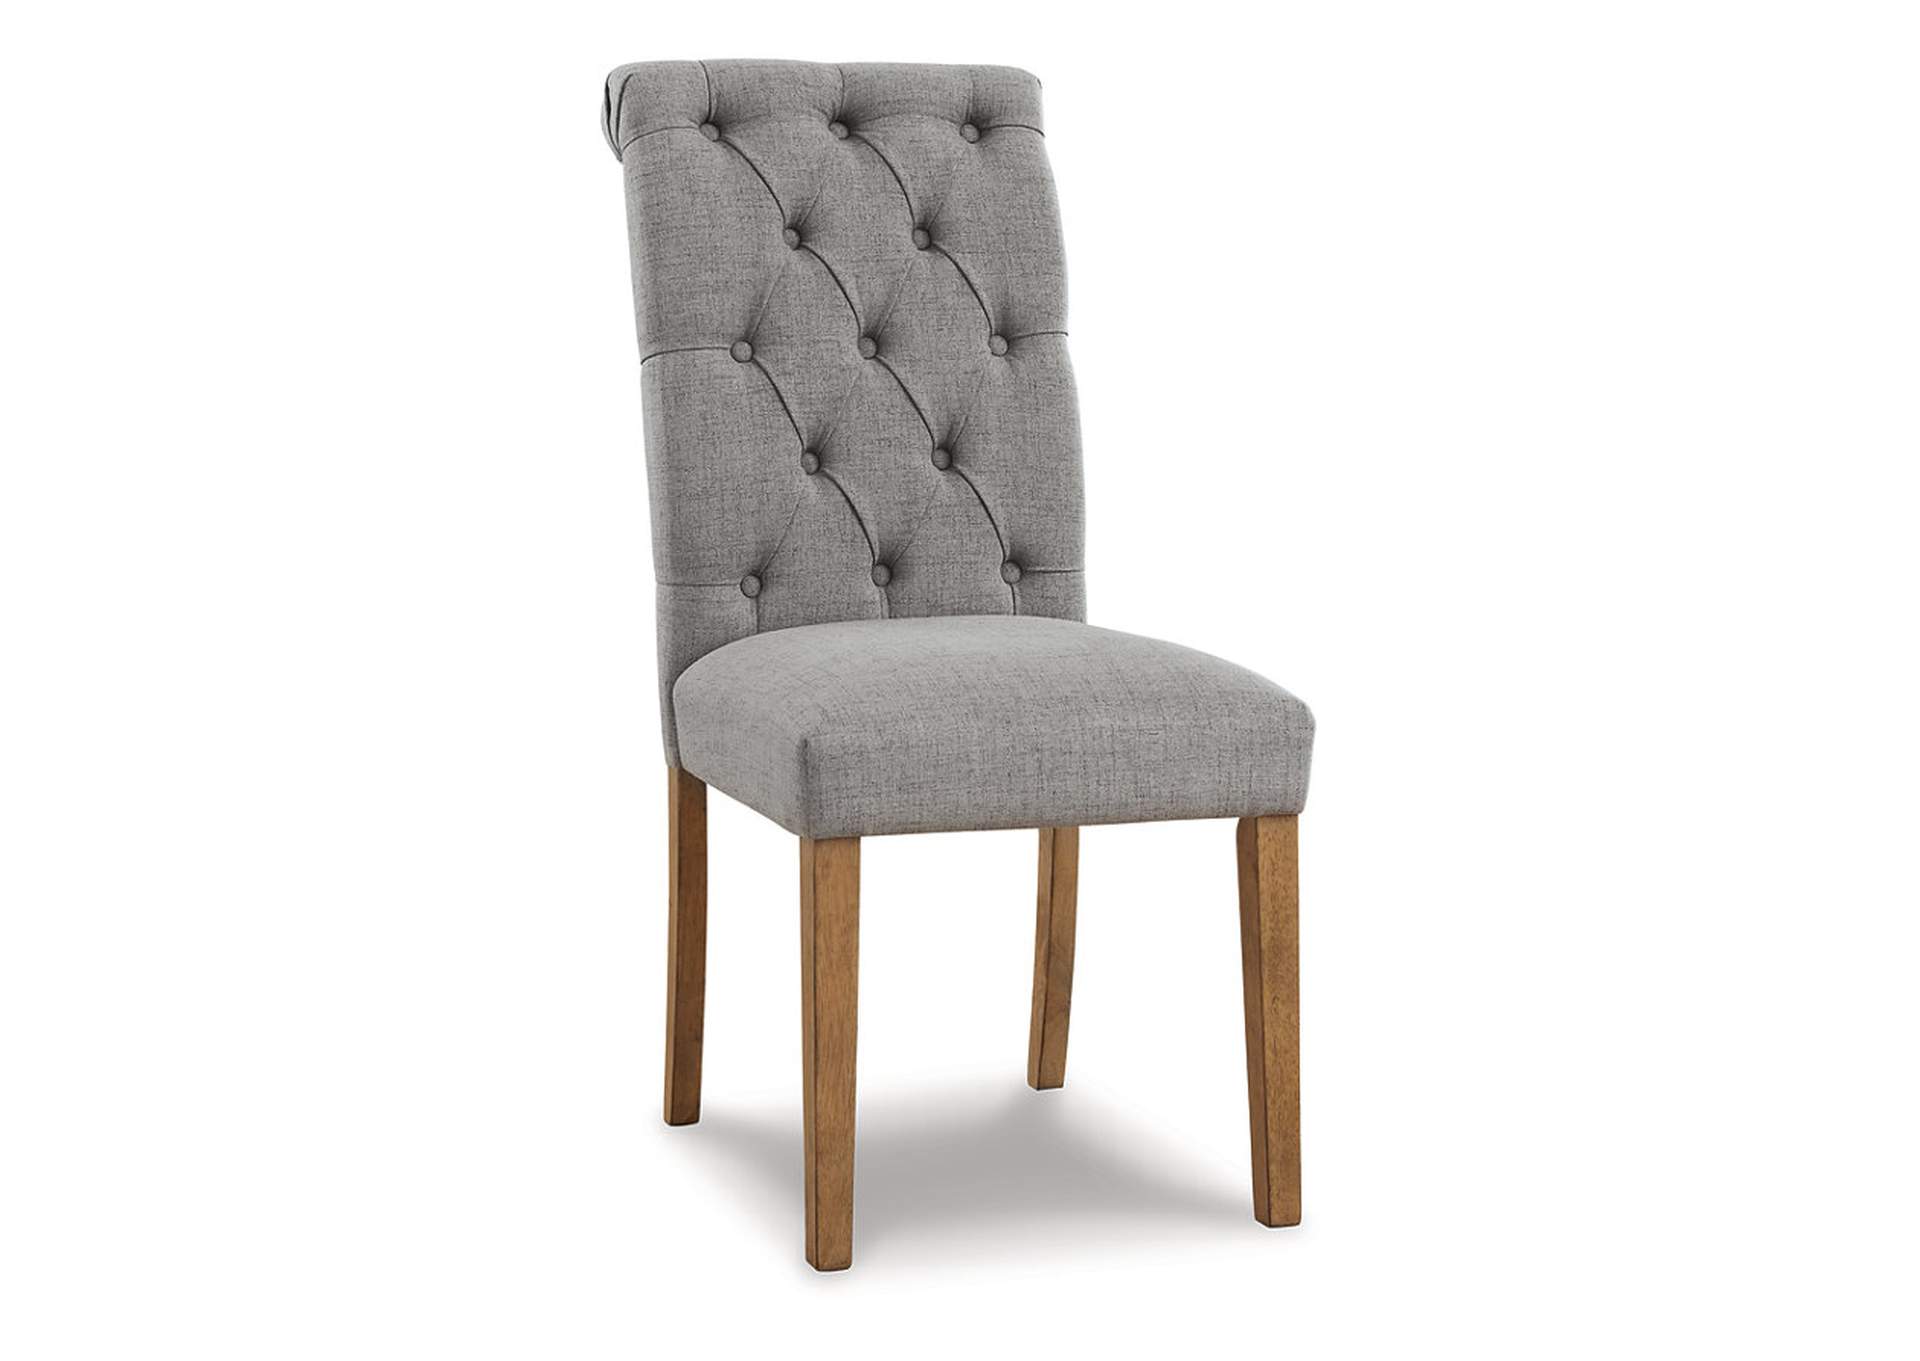 Harvina Dining Chair,Direct To Consumer Express